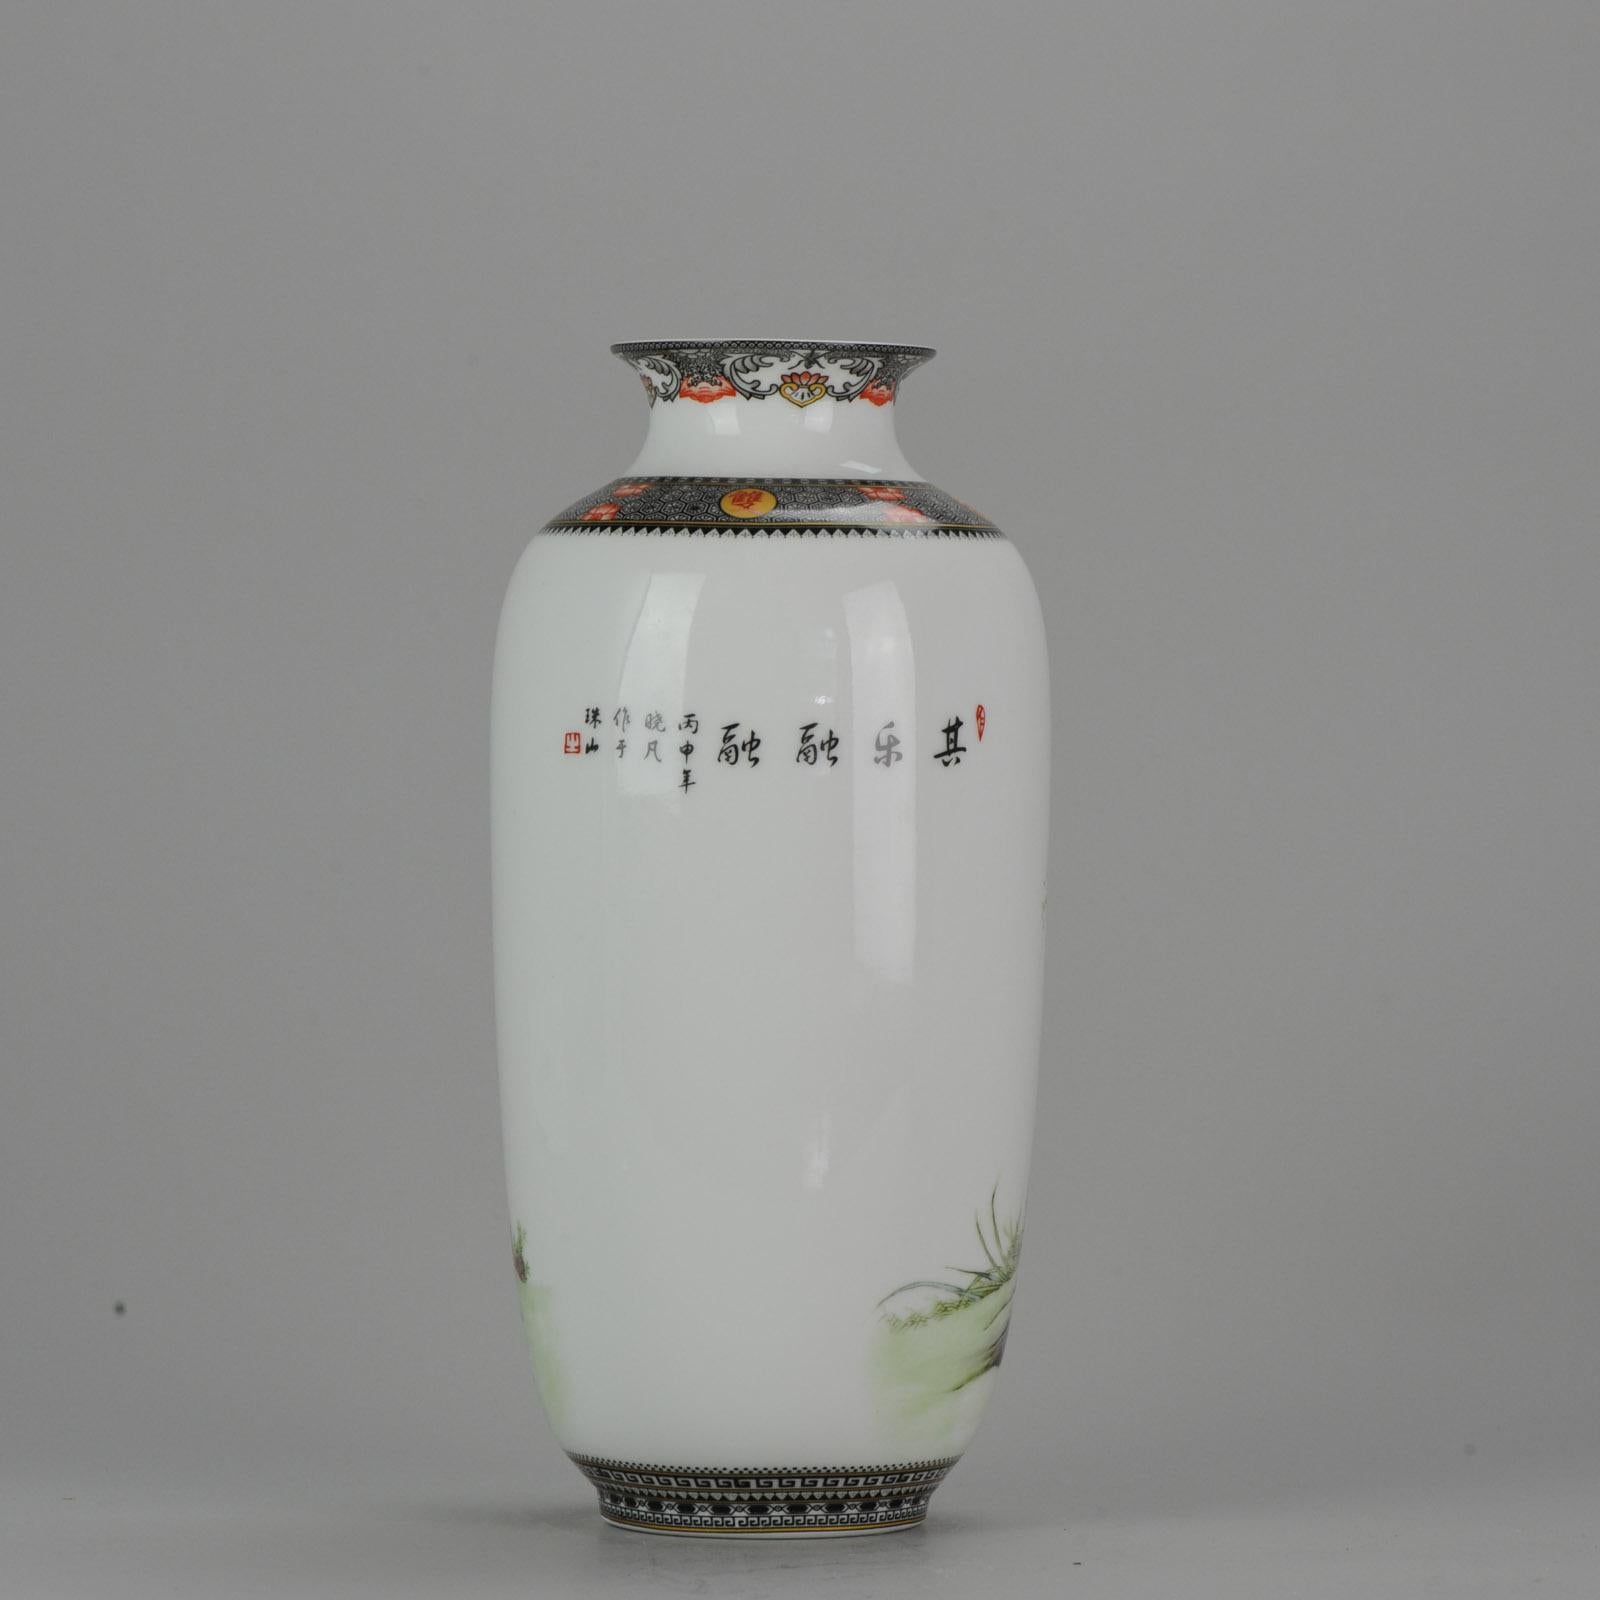 A very nicely decorated vase, modern piece, but really beautiful and detailed.

The decoration is printed.

Additional information:
Material: Porcelain & Pottery
Type: Vase
Country of Manufacturing: China
Region of Origin: China
Period: 21st